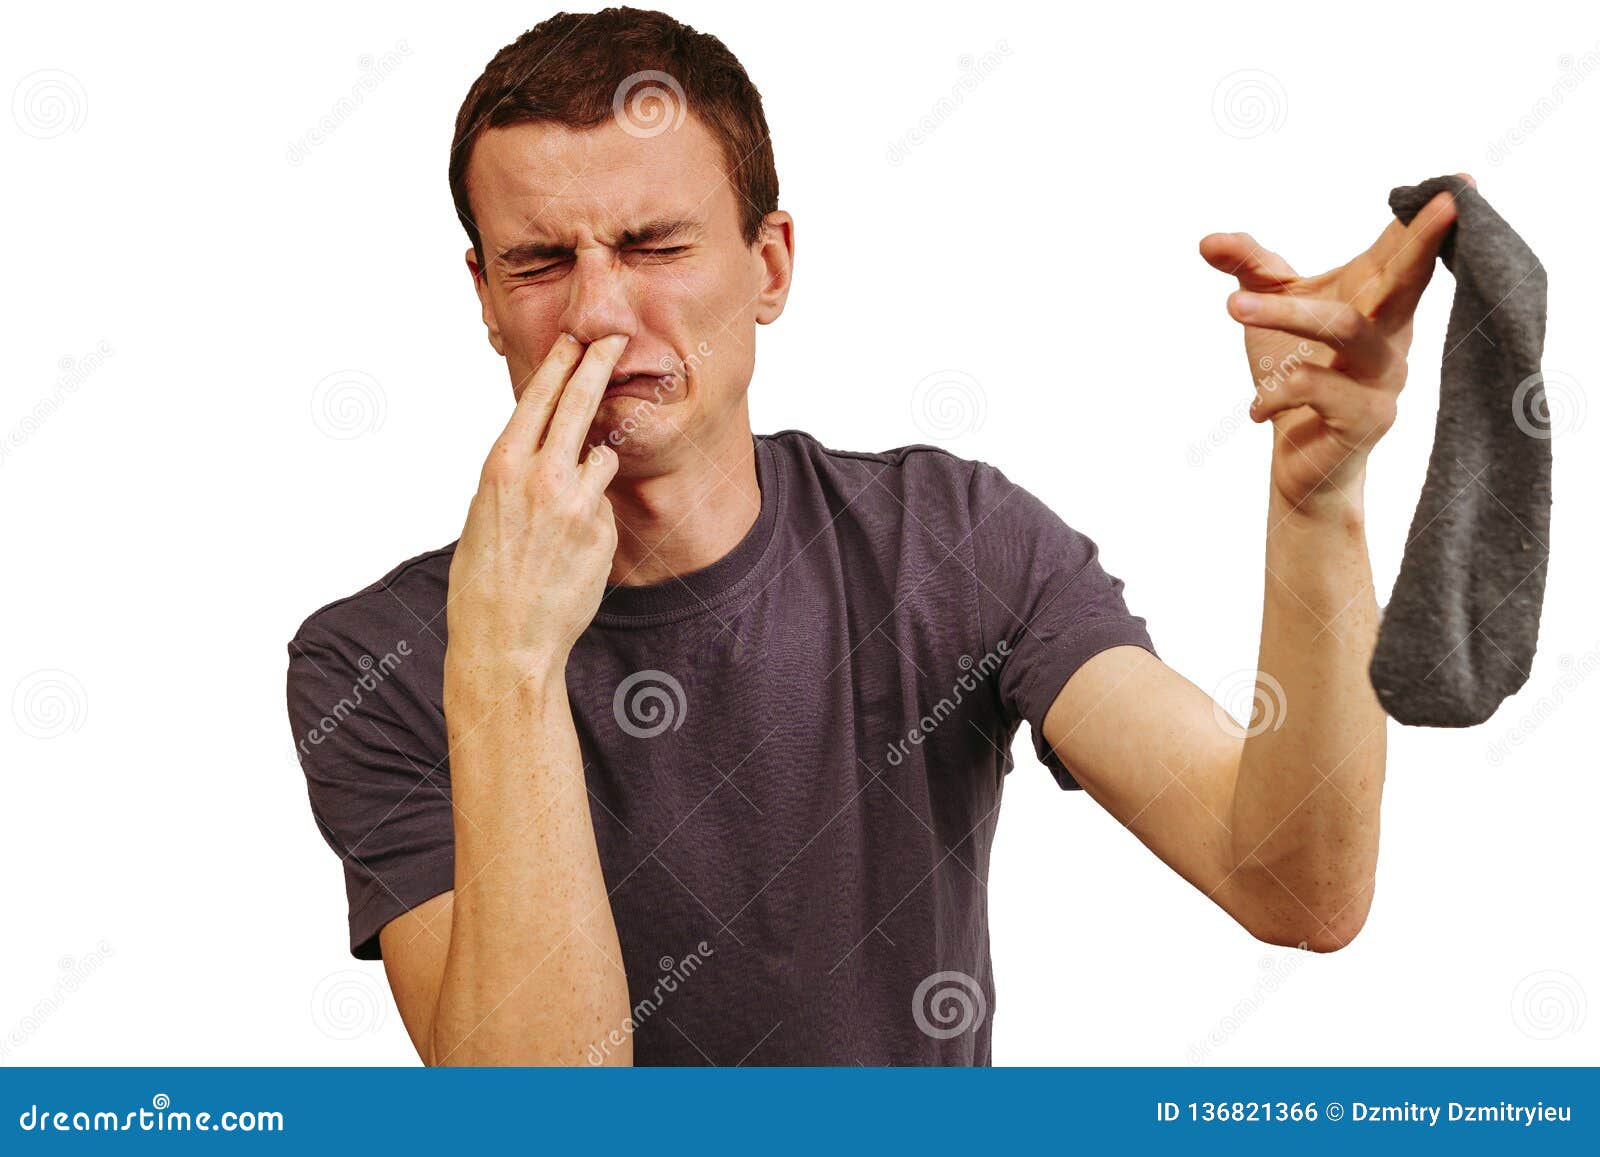 The Guy with Dirty Socks in His Hands on a White Background. Stock